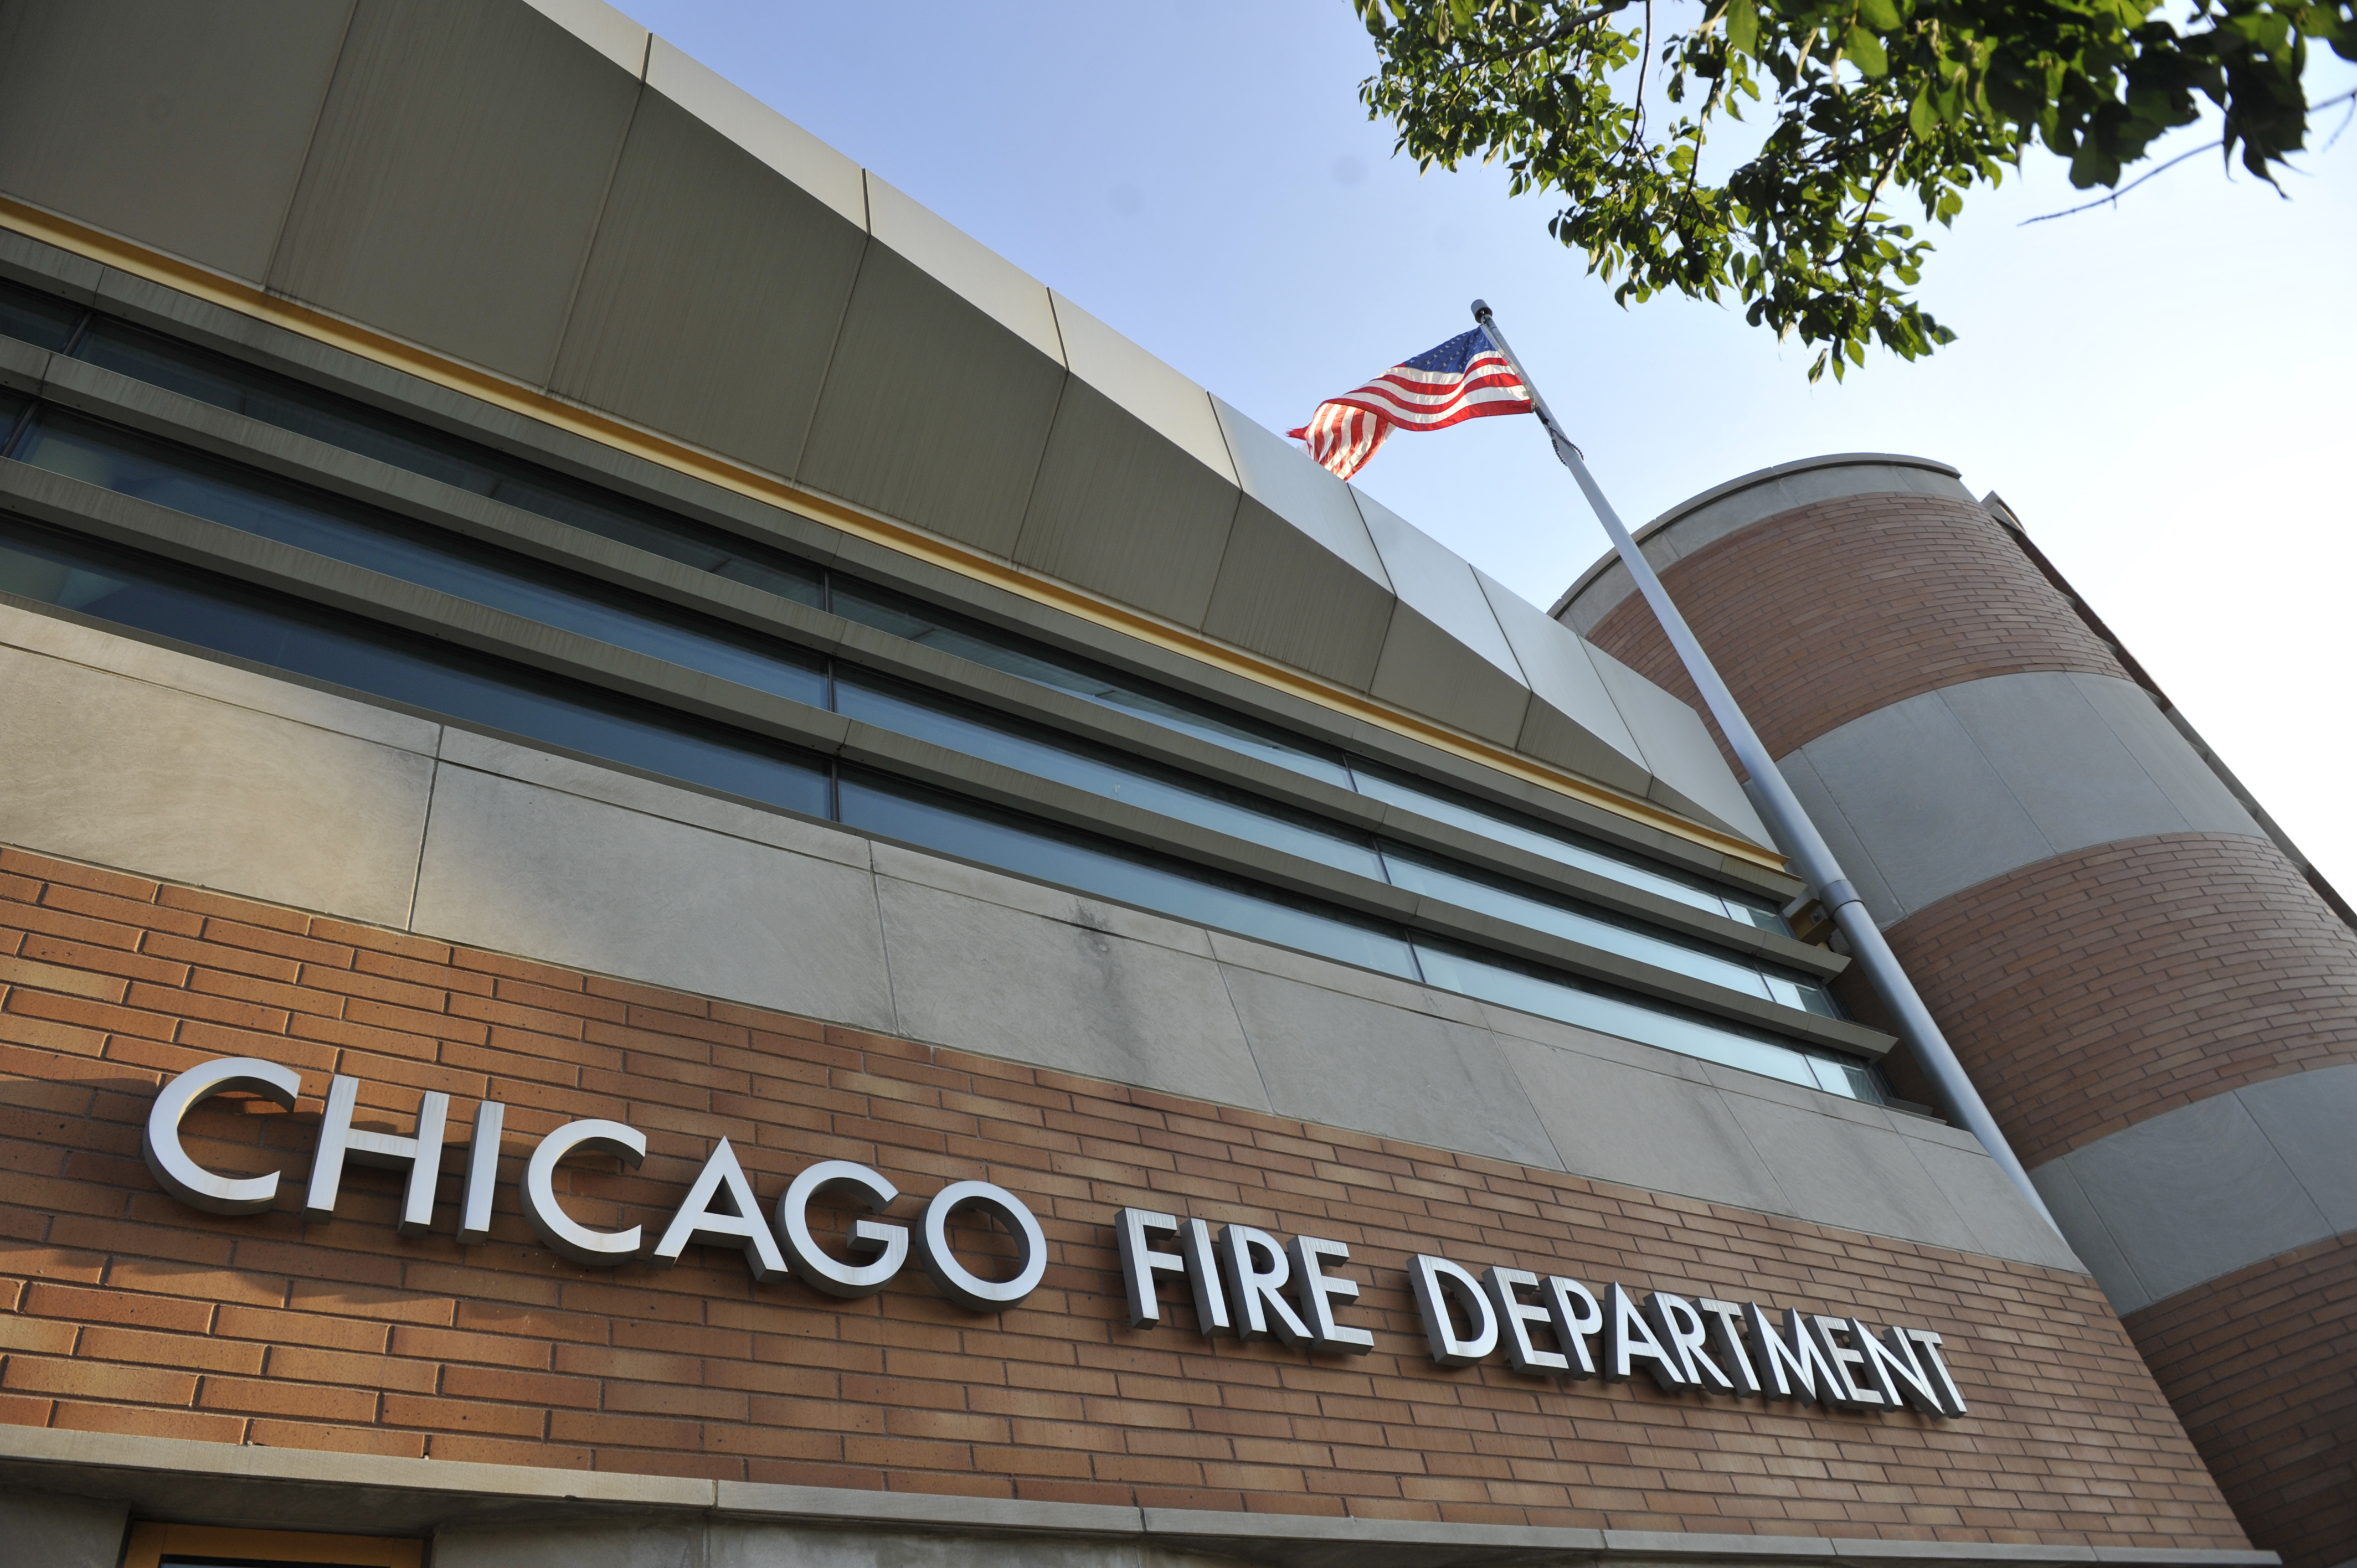 Chicago Fire Department station at 1440 E. 67th St. on Monday. Engine No. 63 is based at the station, located in Woodlawn.